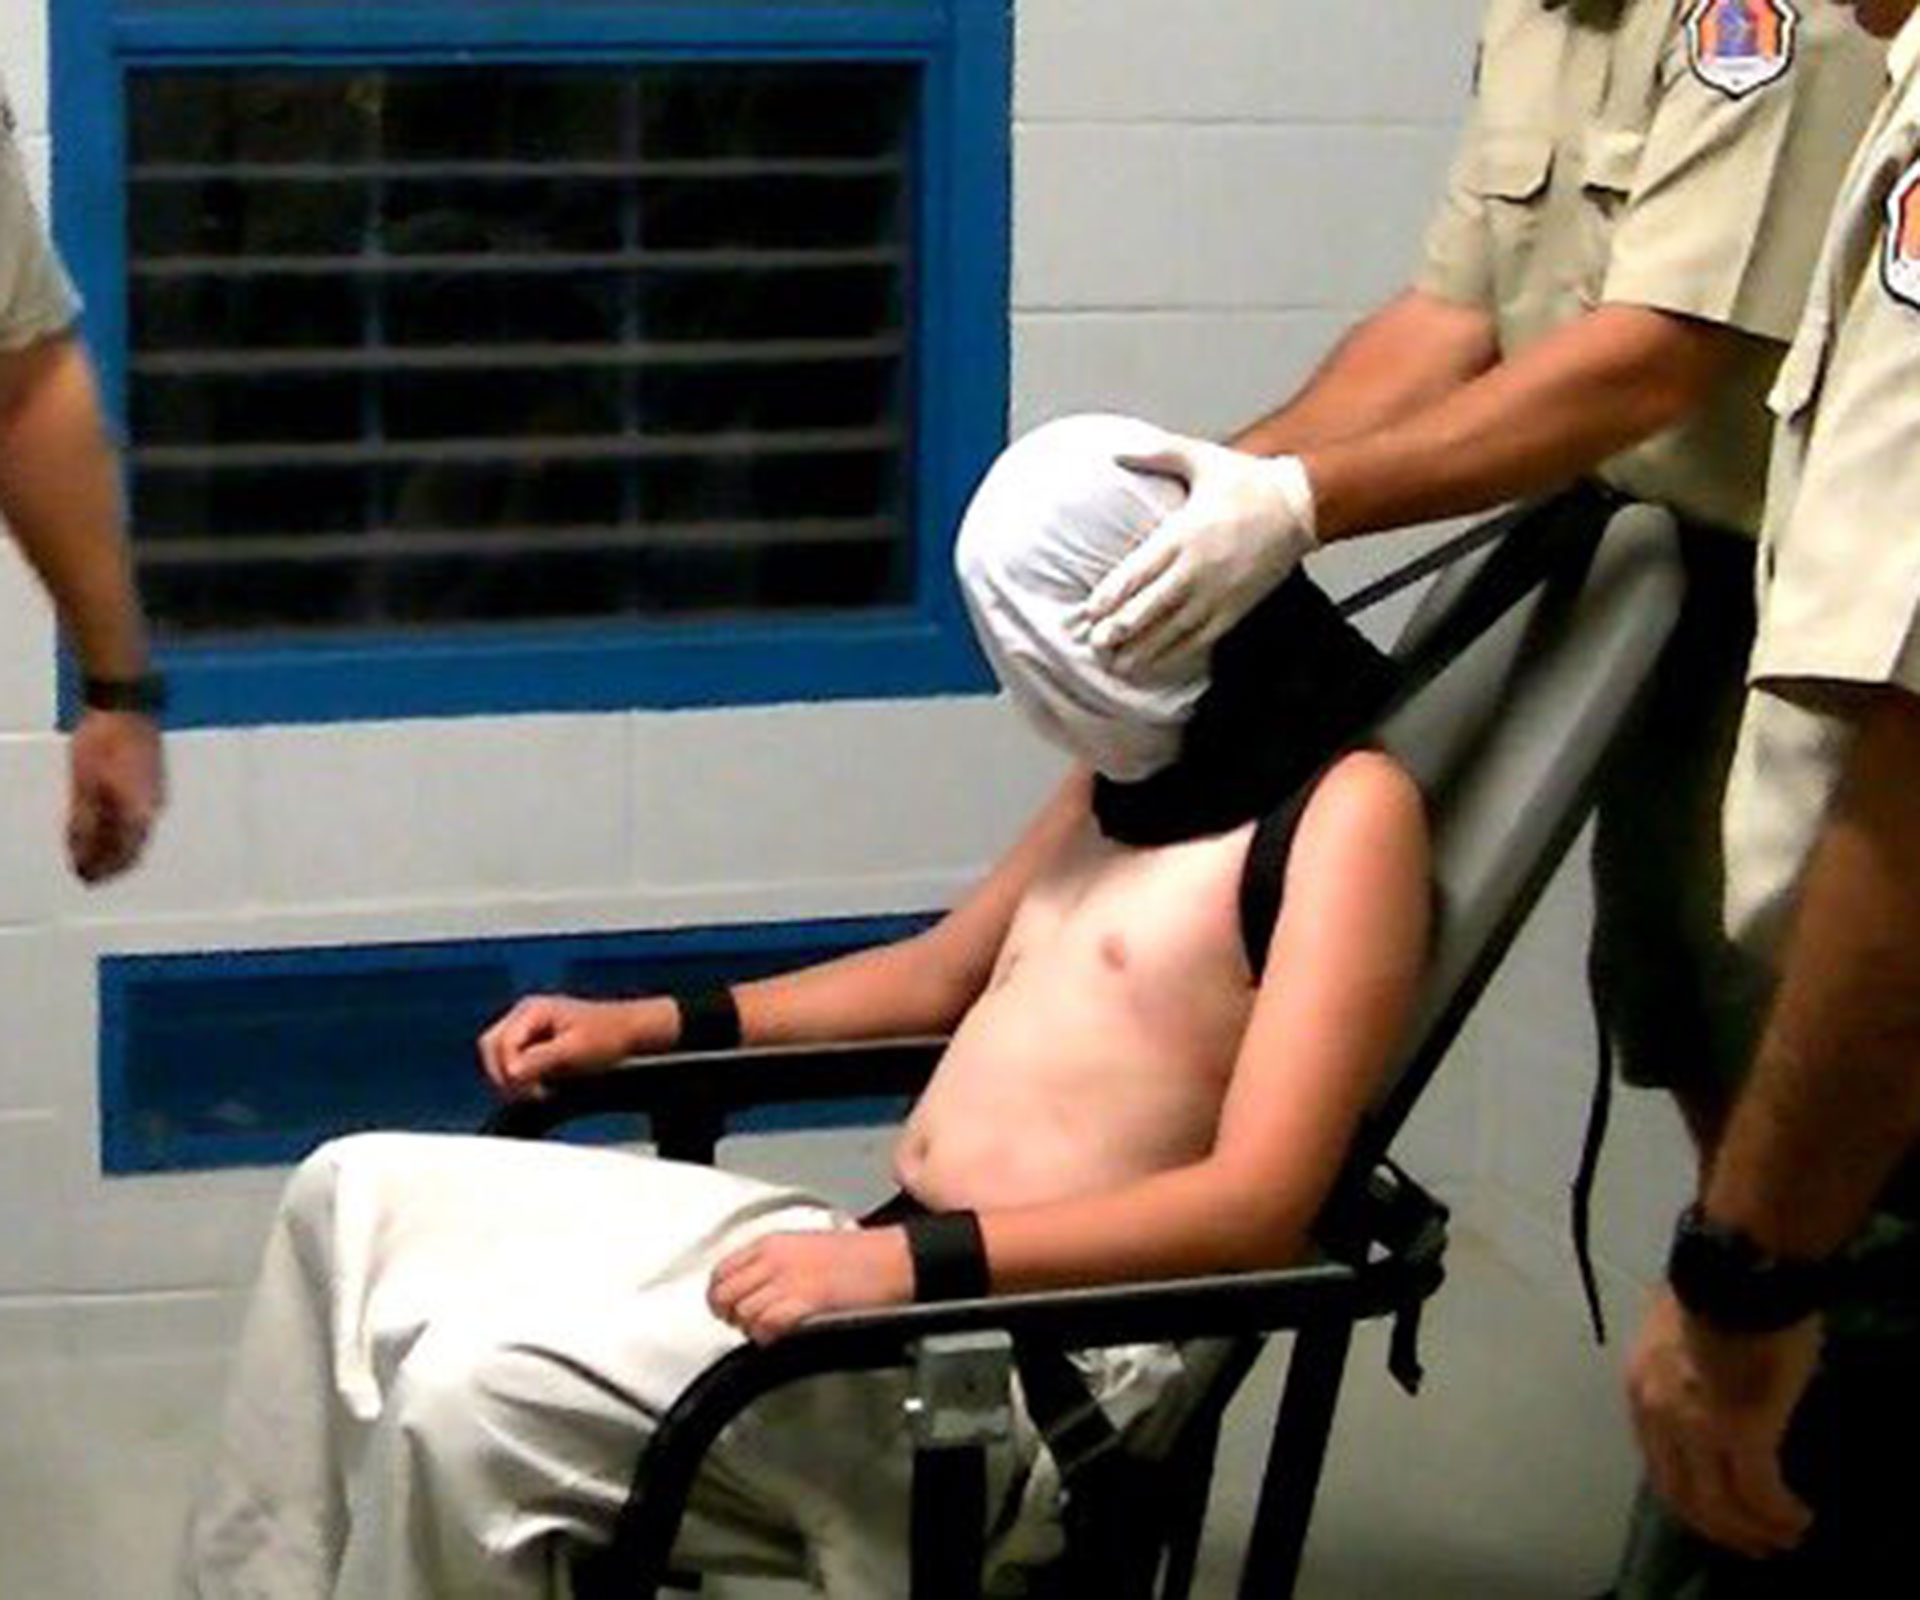 PM calls for Royal Commission following alleged NT juvenile detention abuse